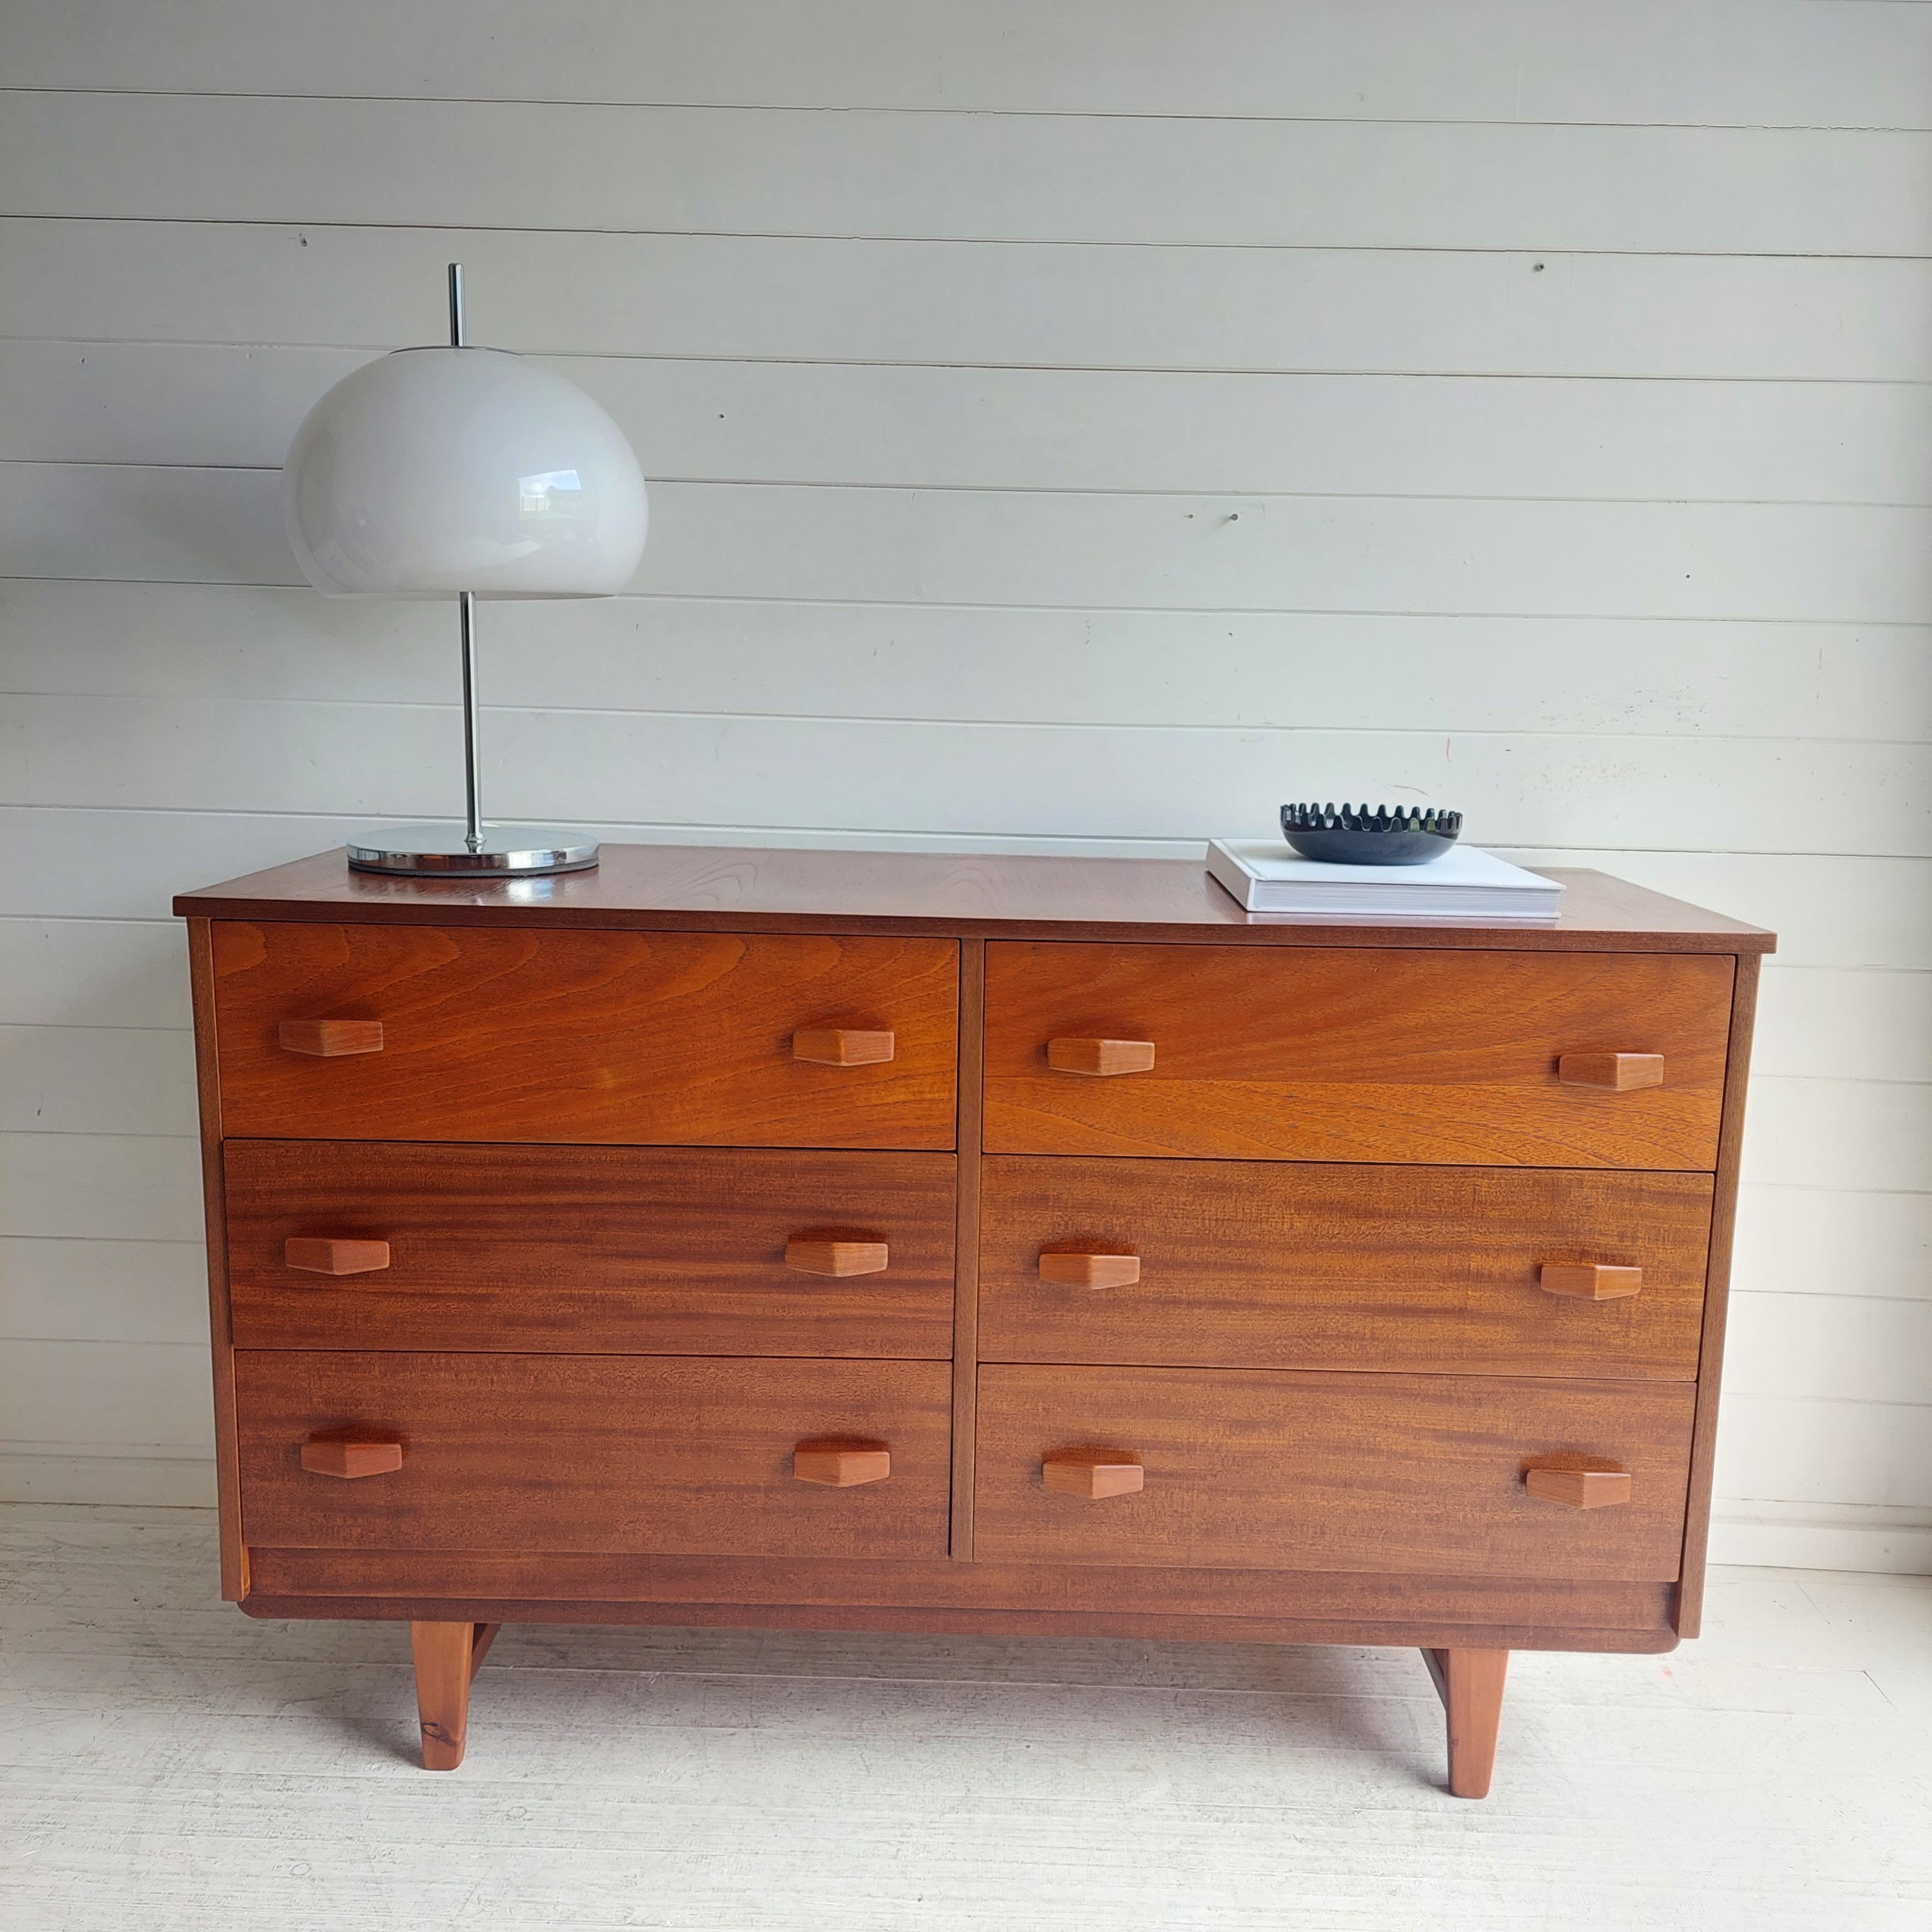 Mid 20th Century Teak Double Chest Of Drawers
Rare piece, probably custom made designed in the style of Børge Mogensen for Søborg Møbelfabrik 
Circa 1950s
Most probably made in Denmark 

This piece features six drawers.
The main body is constructed